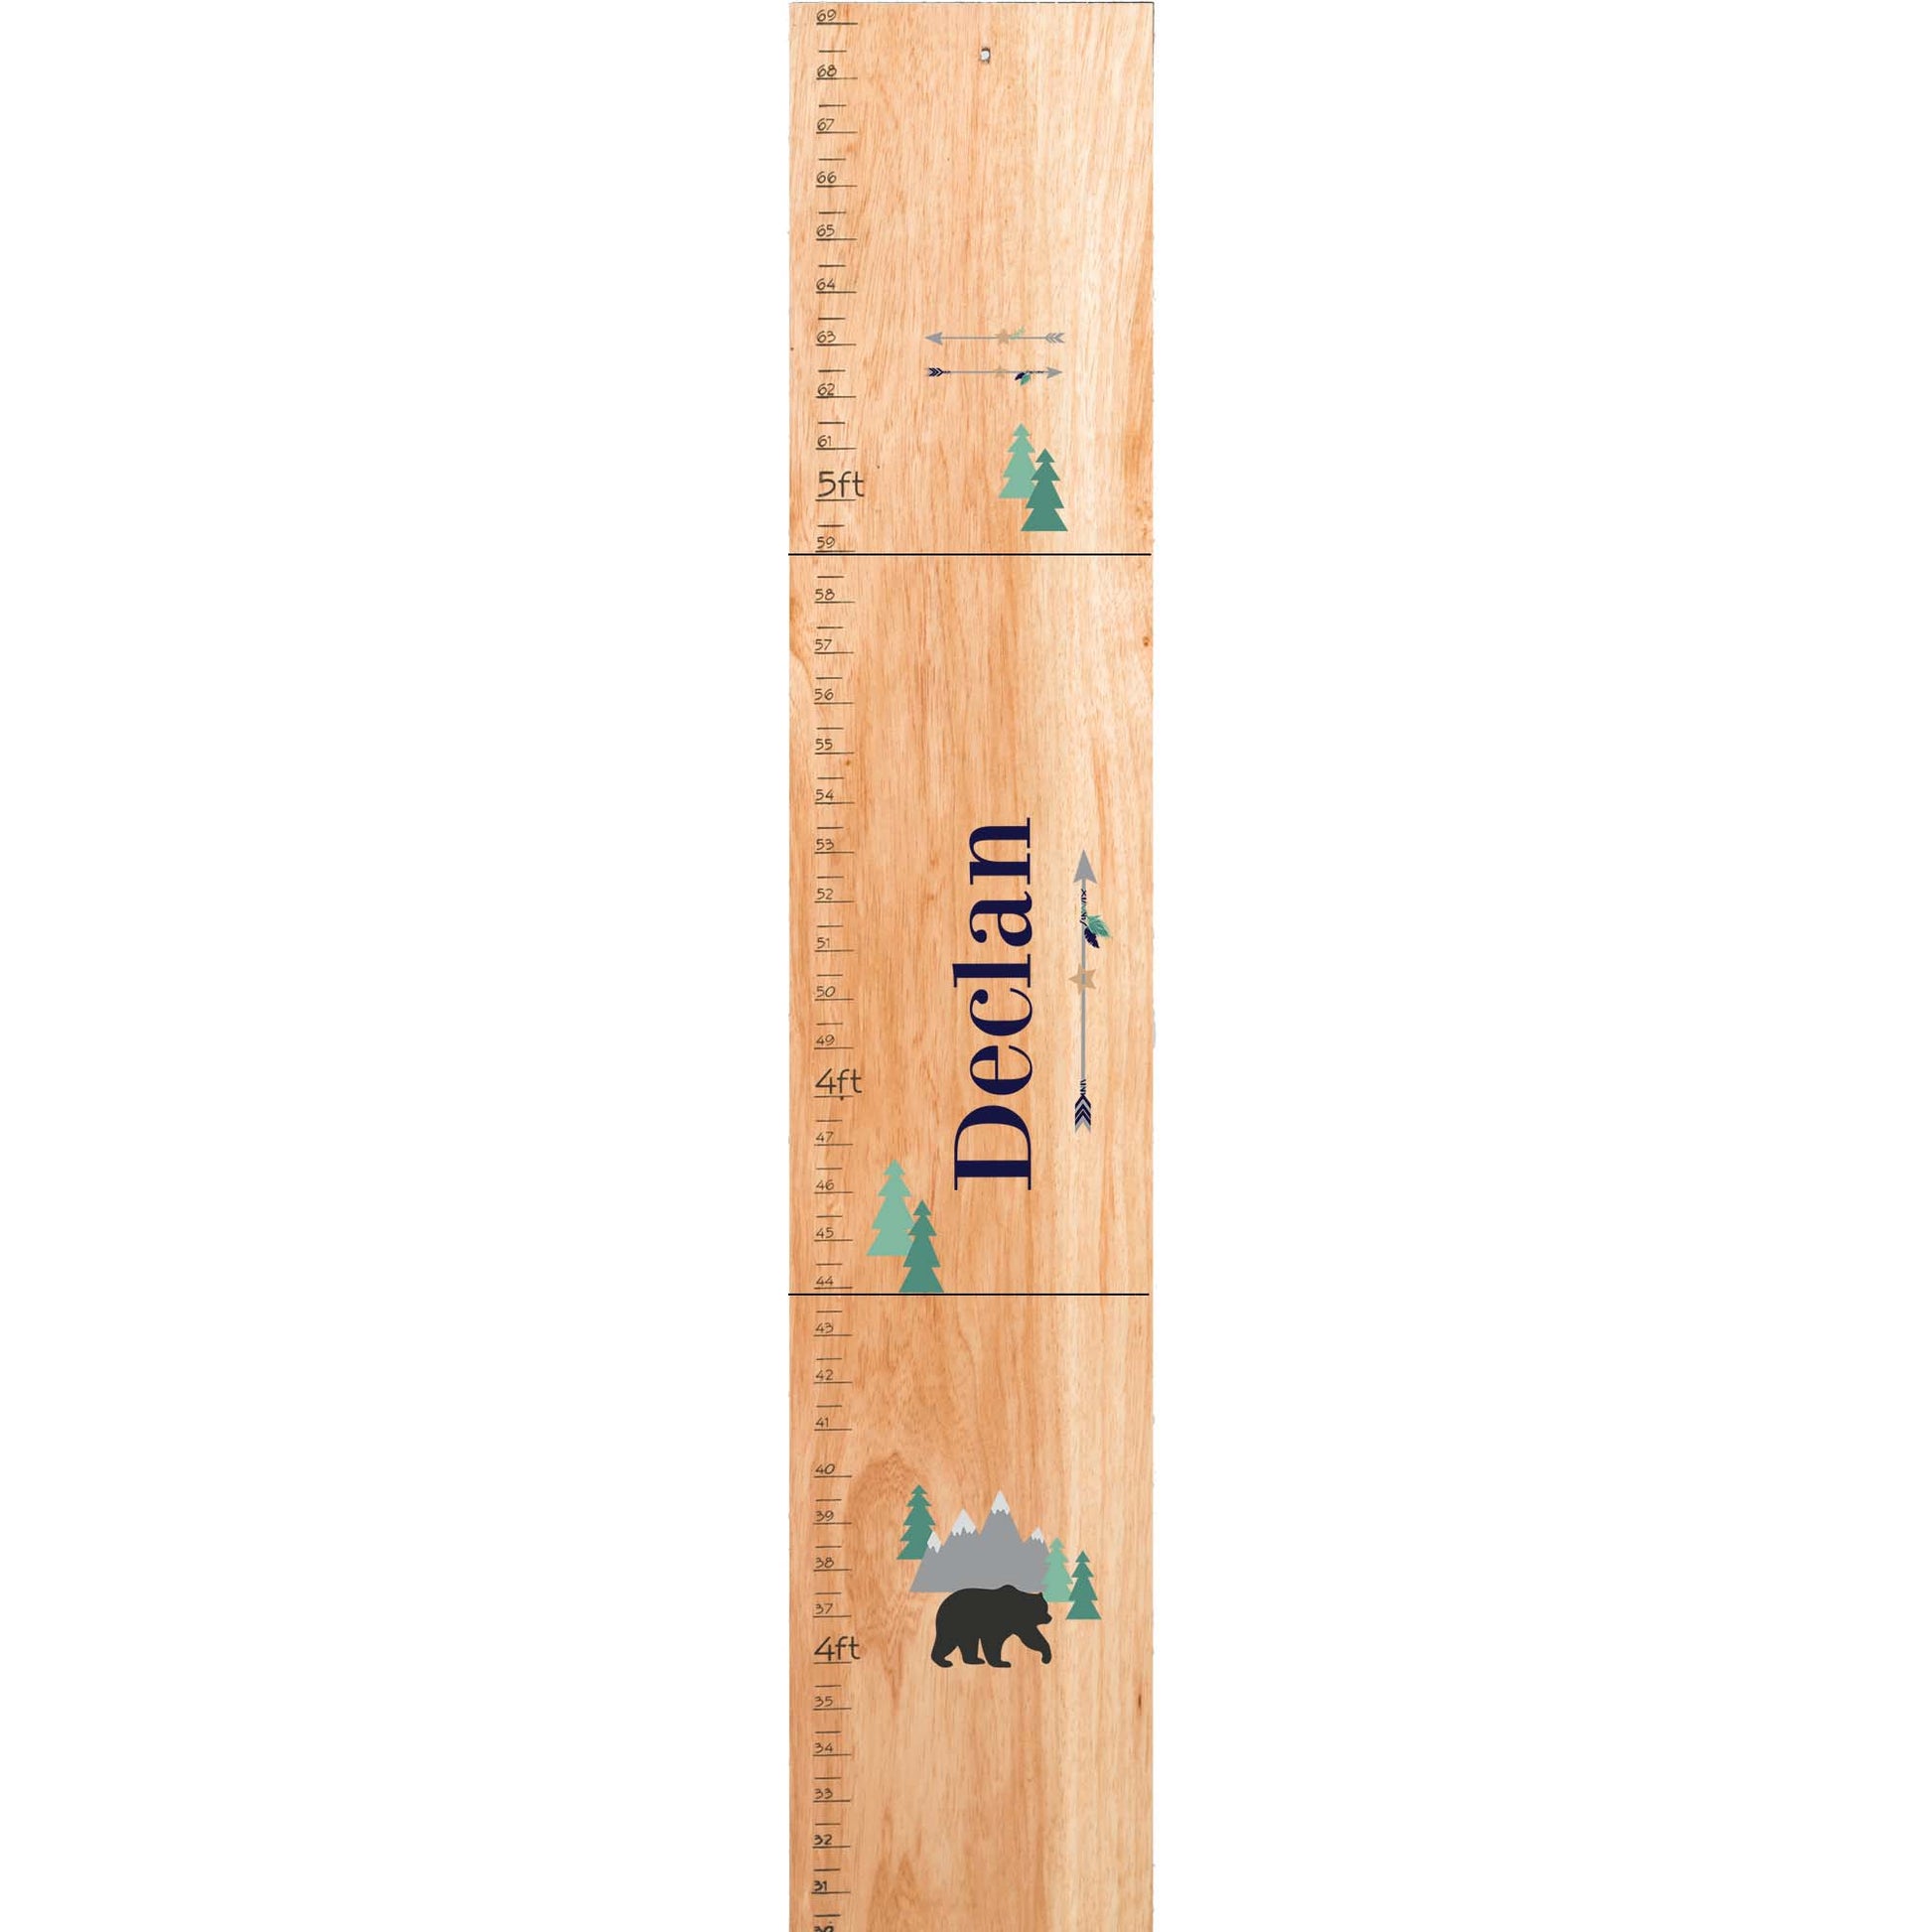 Personalized Natural Growth Chart With Mountain Bear Design